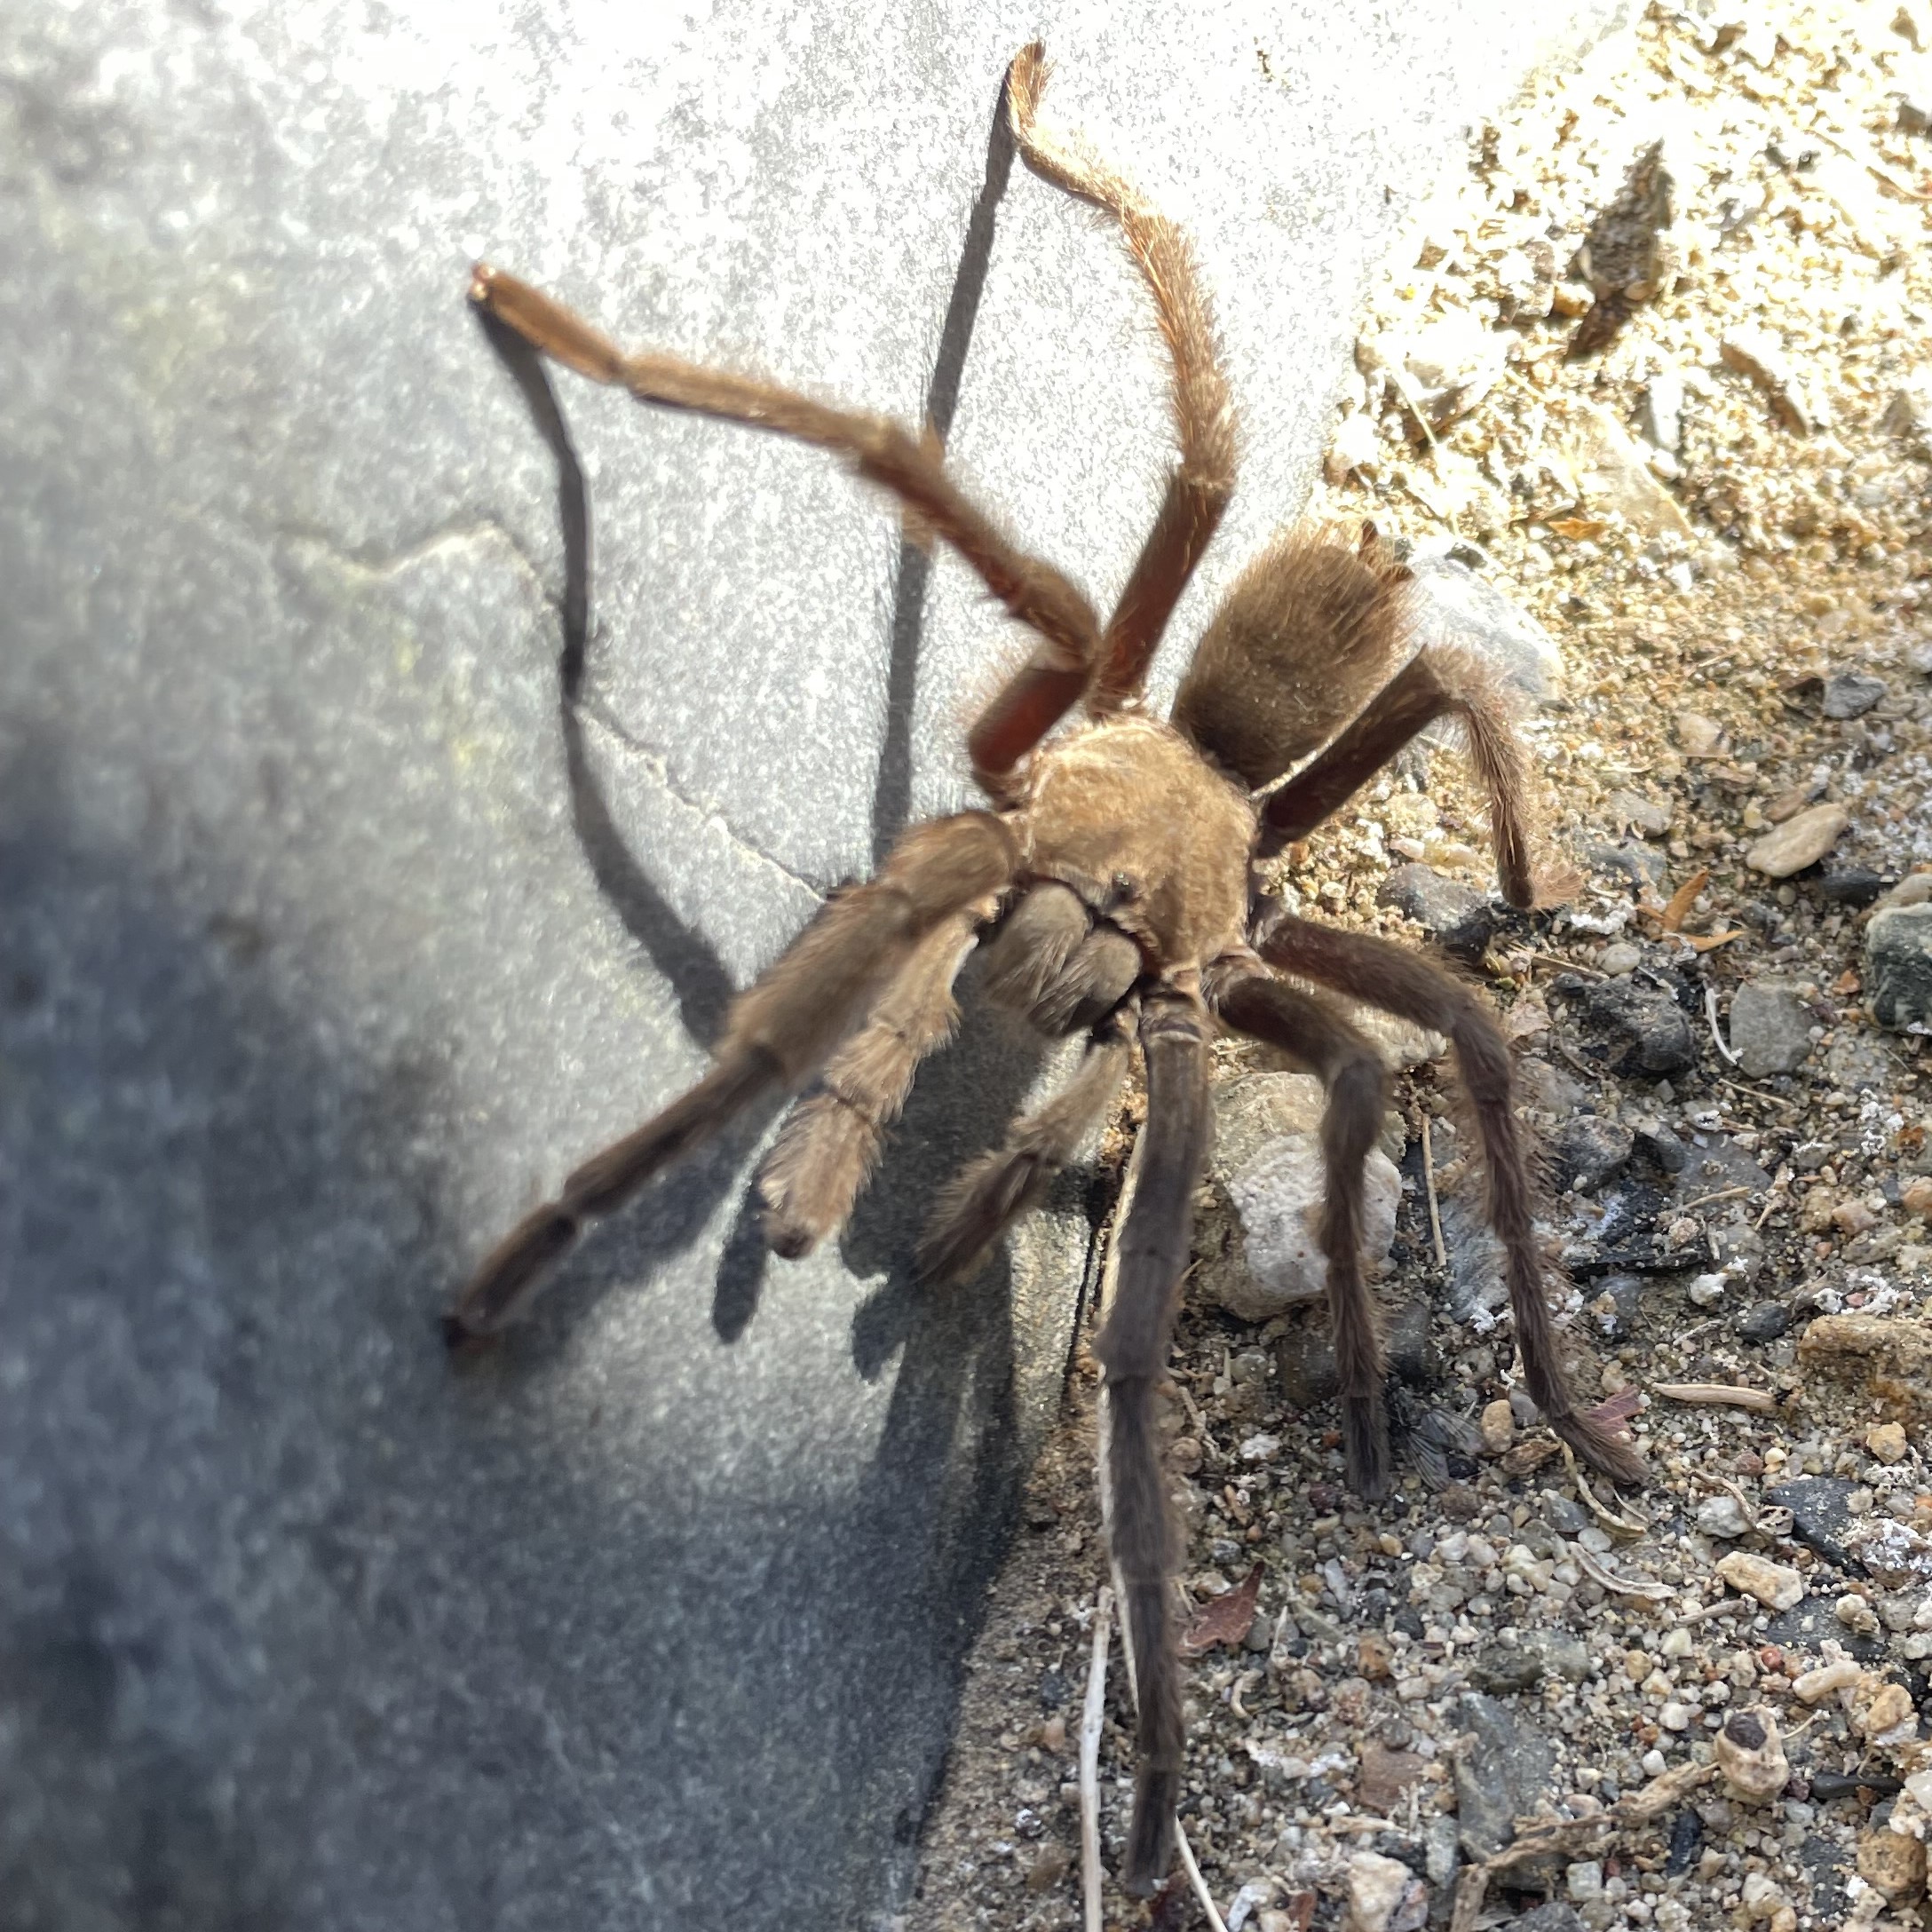 A brown hairy spider with seven legs straddles a rock wall and gravel ground.